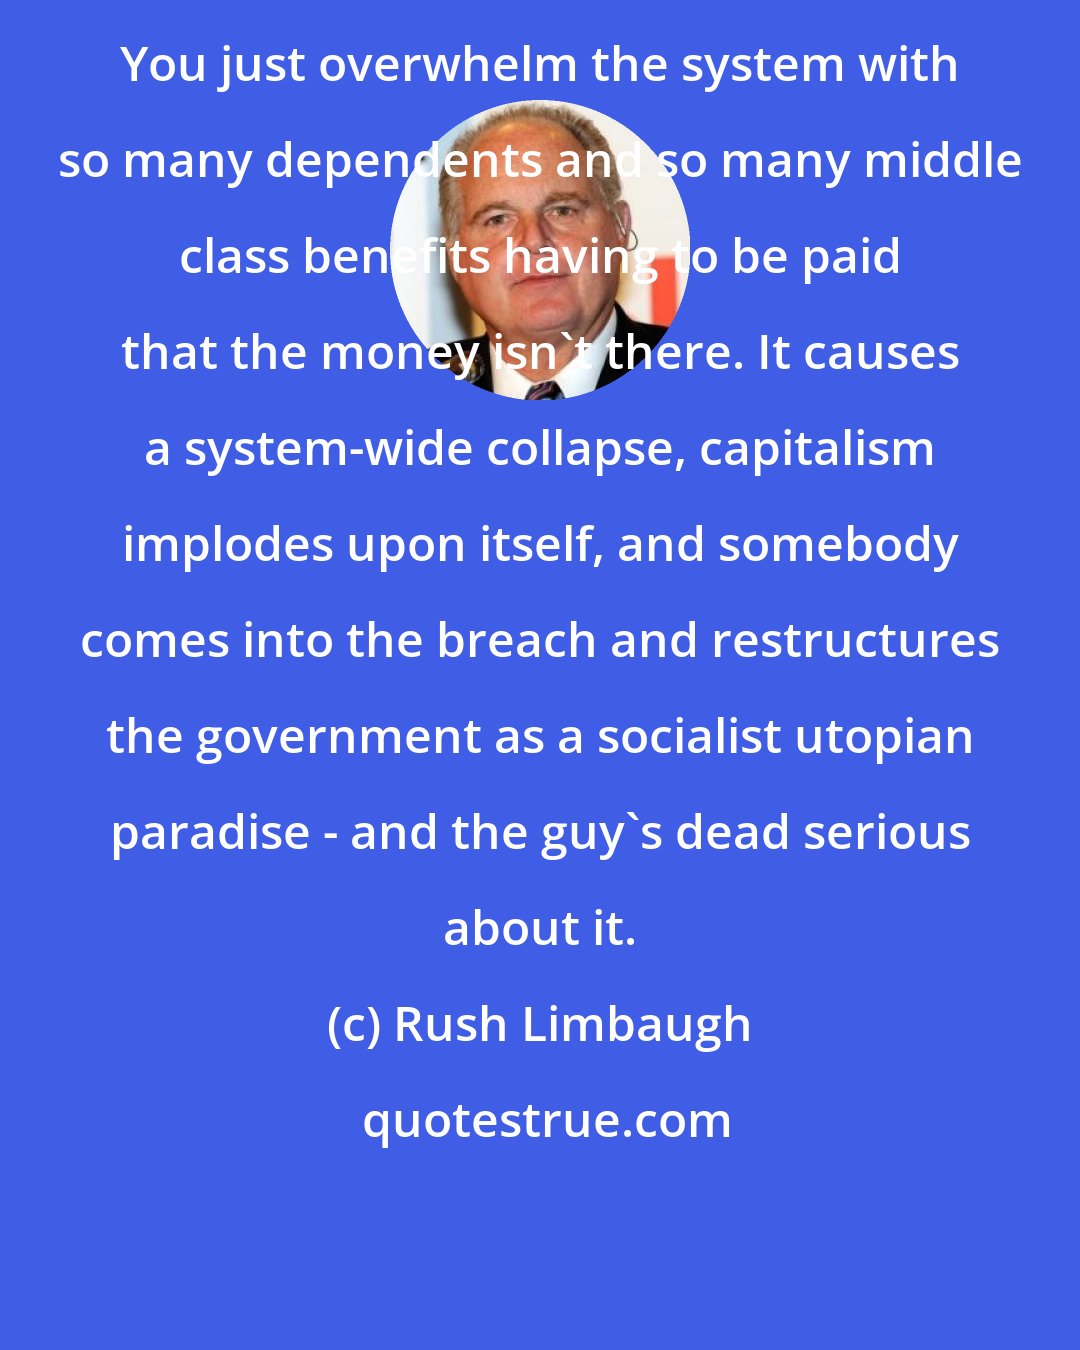 Rush Limbaugh: You just overwhelm the system with so many dependents and so many middle class benefits having to be paid that the money isn't there. It causes a system-wide collapse, capitalism implodes upon itself, and somebody comes into the breach and restructures the government as a socialist utopian paradise - and the guy's dead serious about it.